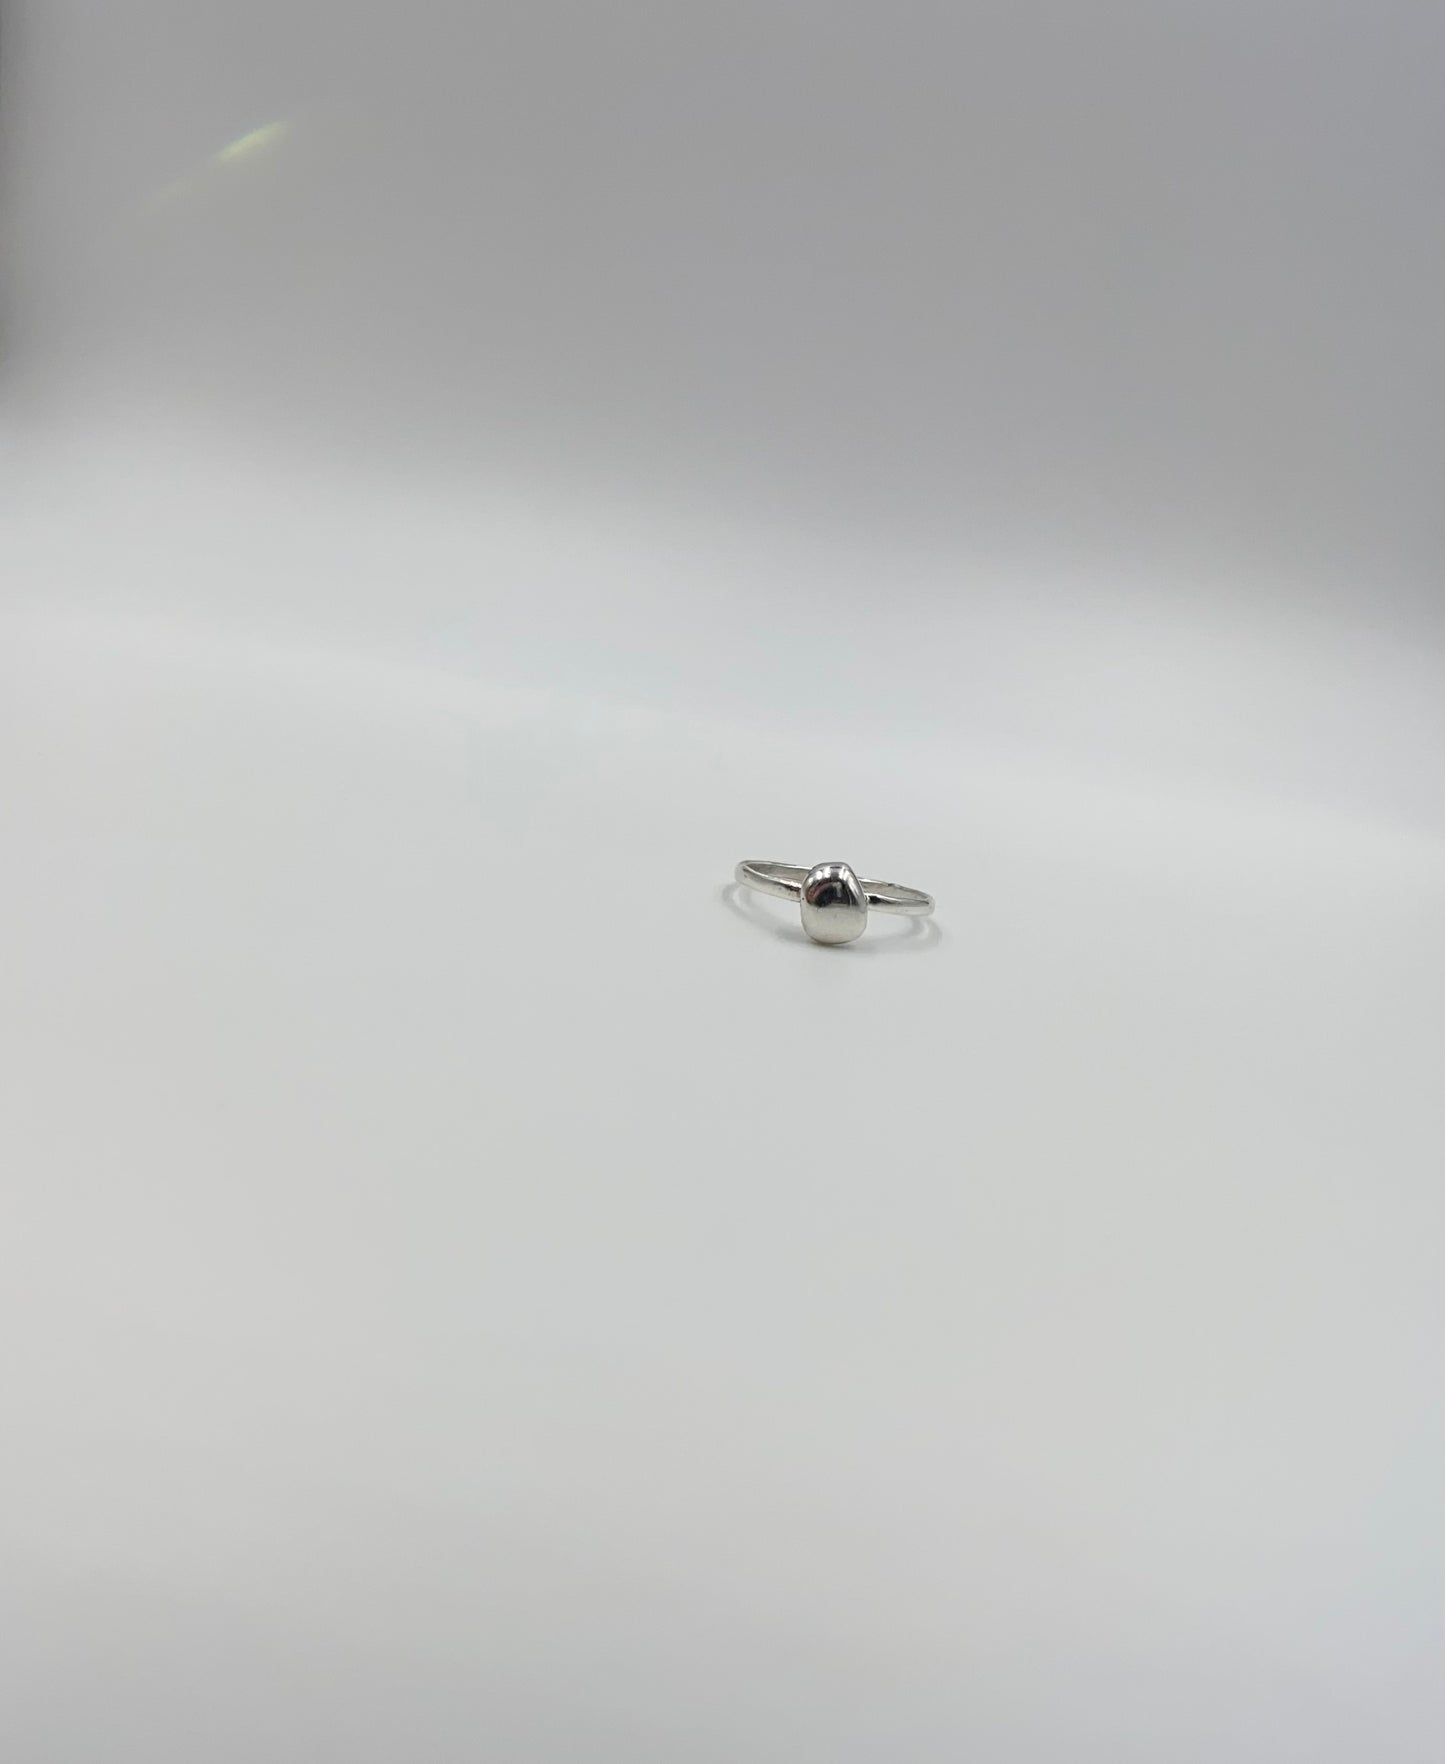 Organic sterling silver ring with large bump of silver resembling a raindrop as the focal, super simple straight band.